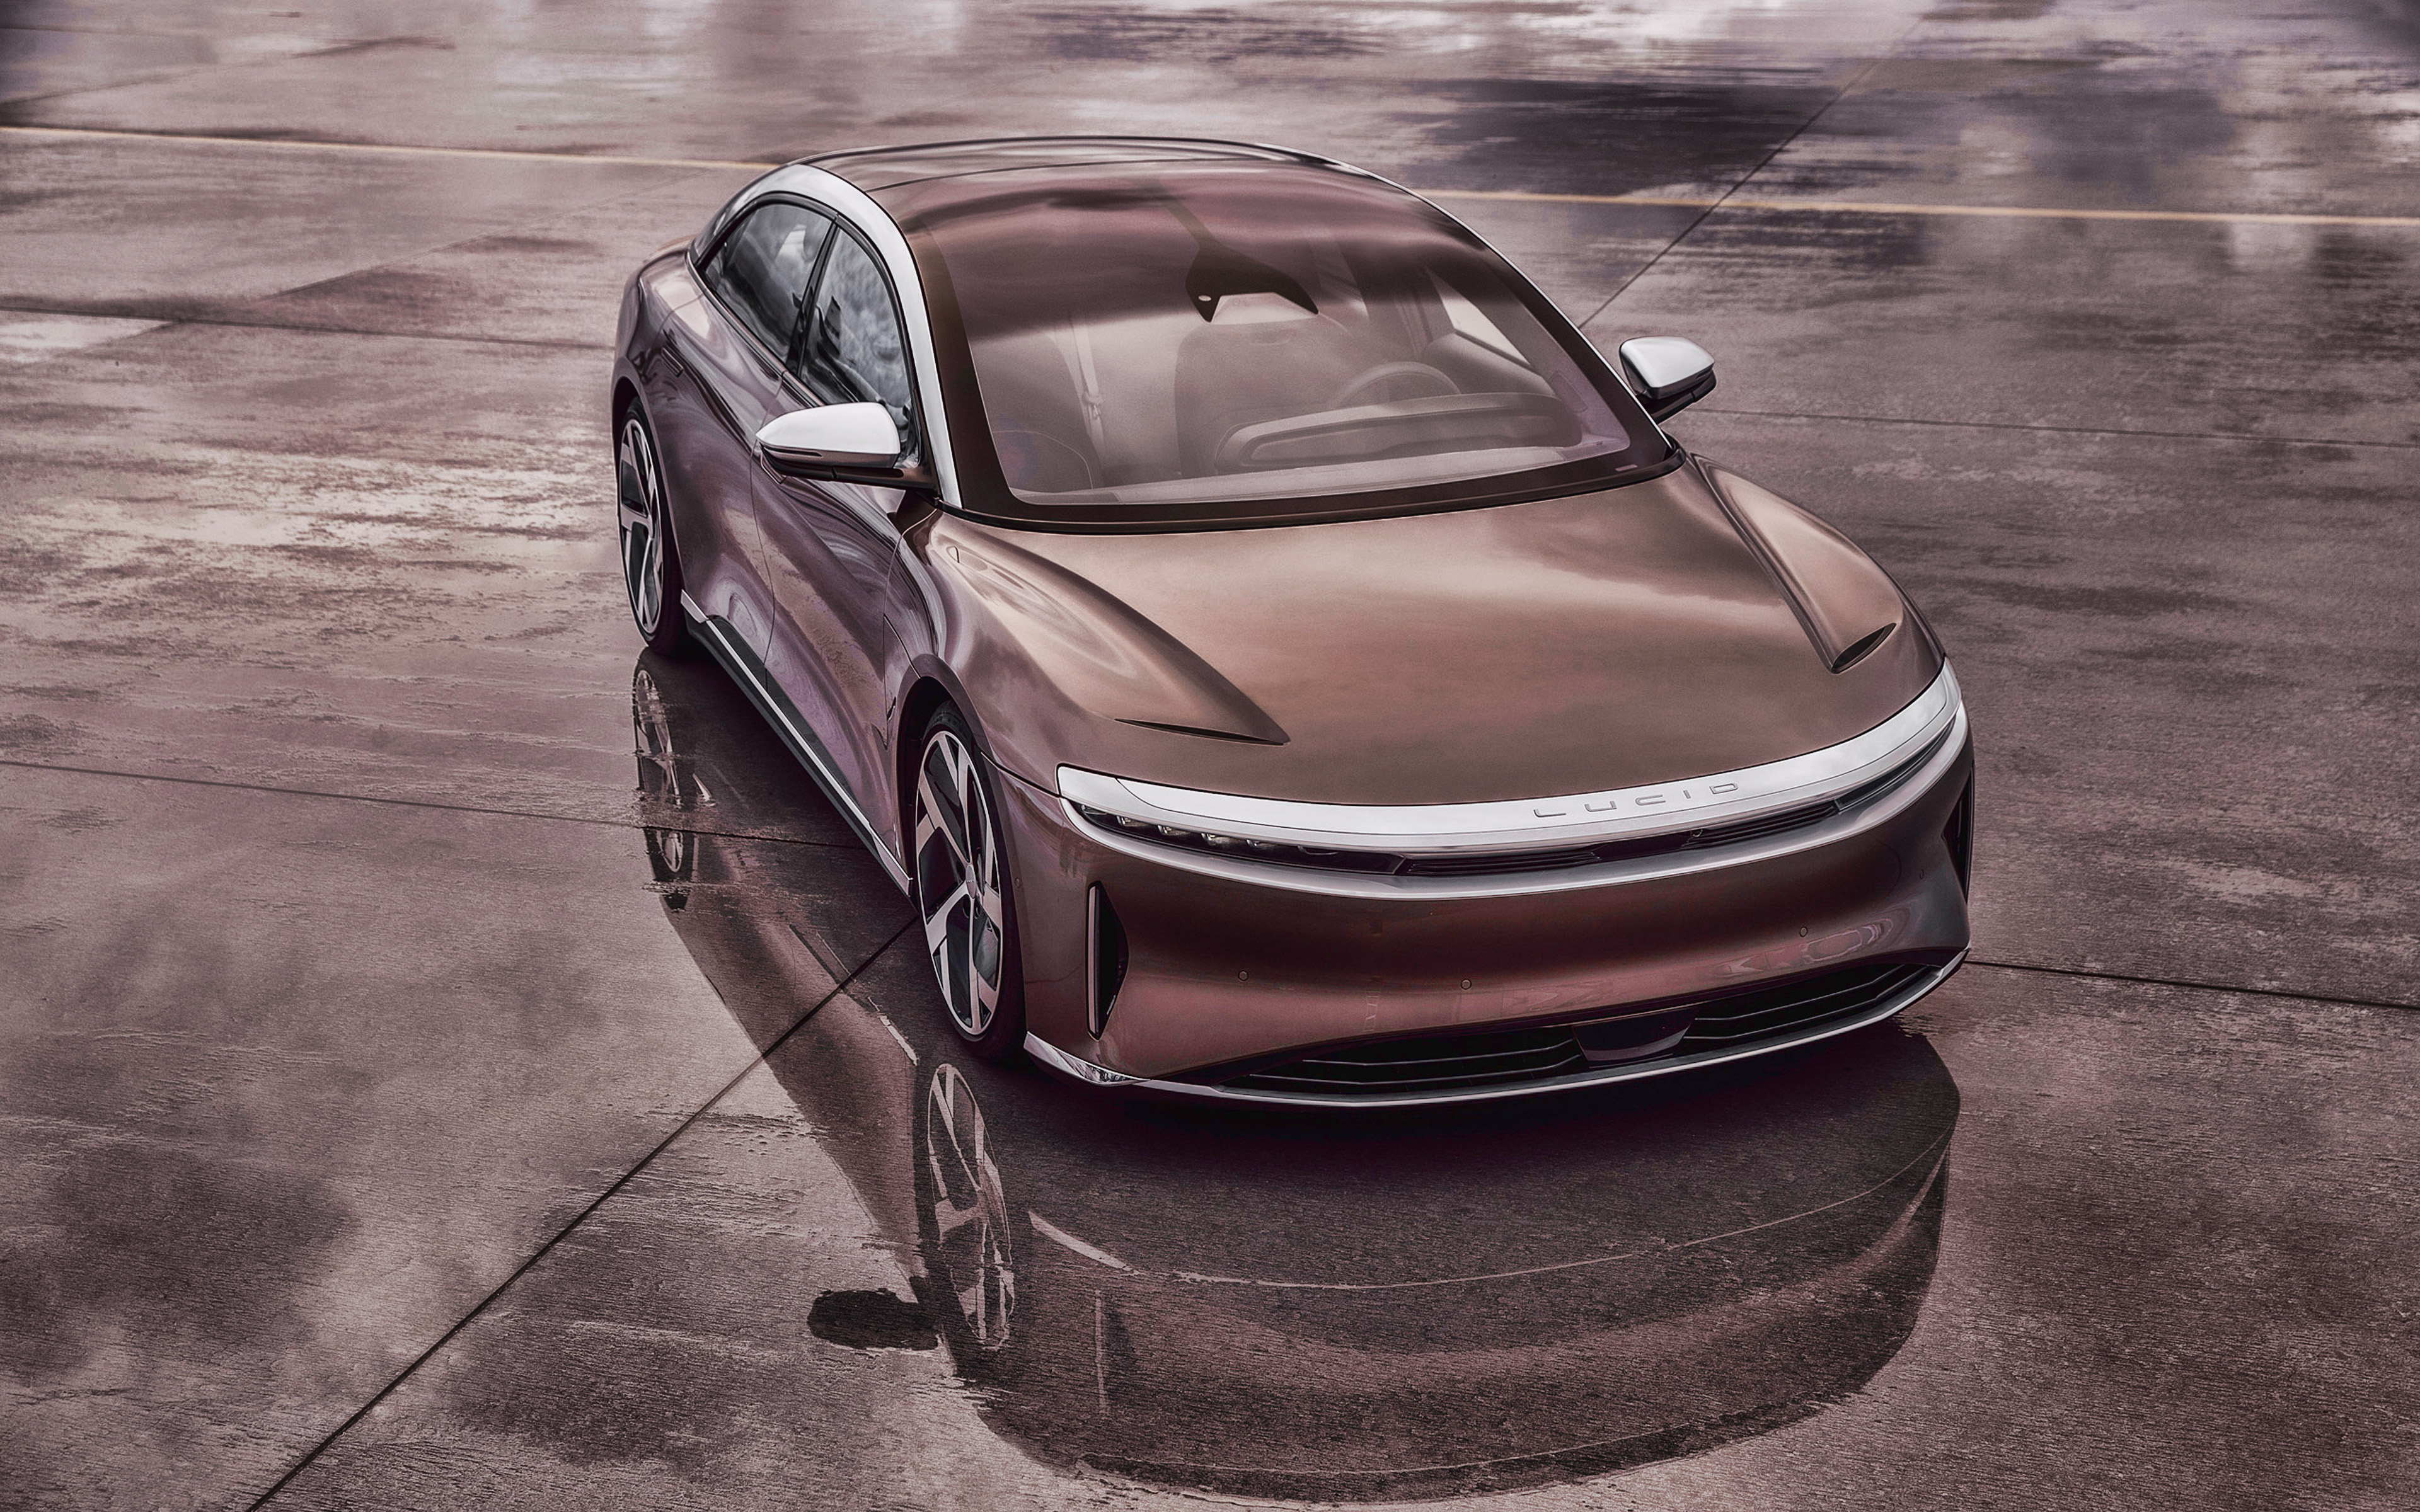 Download wallpaper Lucid Air, 4k, front view, exterior, luxury electric car, new brown Lucid Air, electric coupe, Lucid for desktop with resolution 3840x2400. High Quality HD picture wallpaper